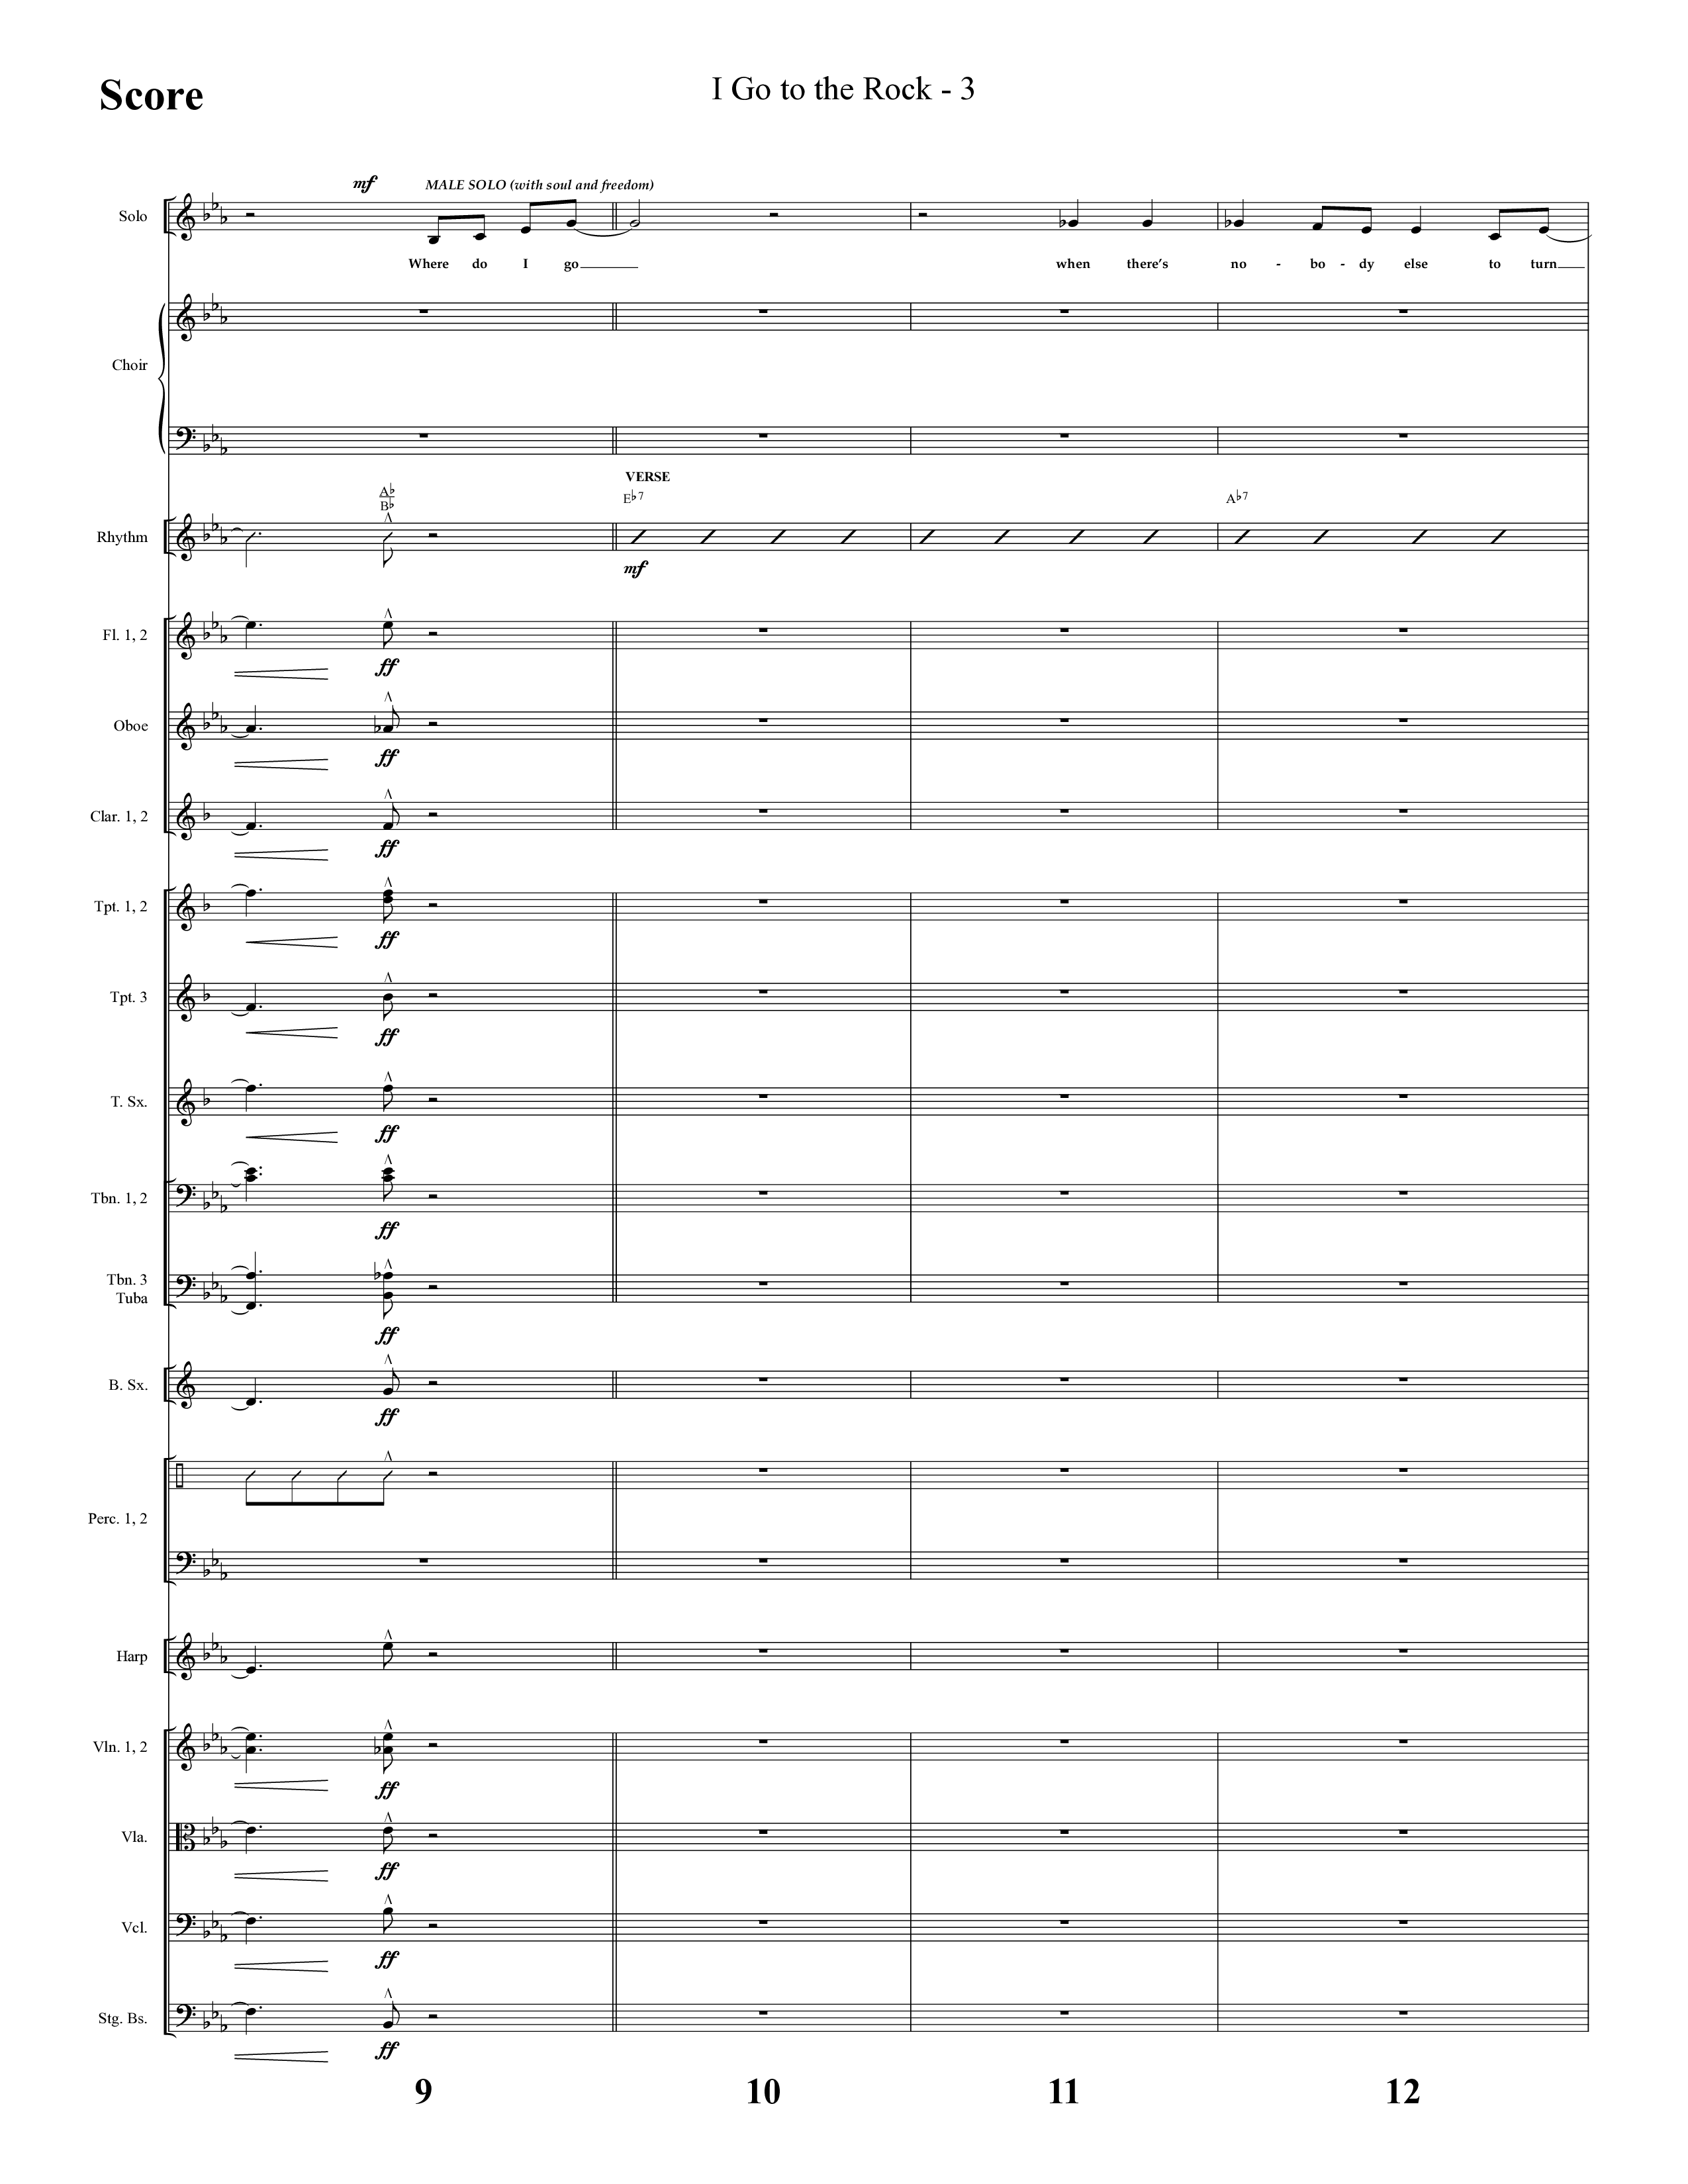 I Go To The Rock (Choral Anthem SATB) Conductor's Score (Lifeway Choral / Arr. Cliff Duren)